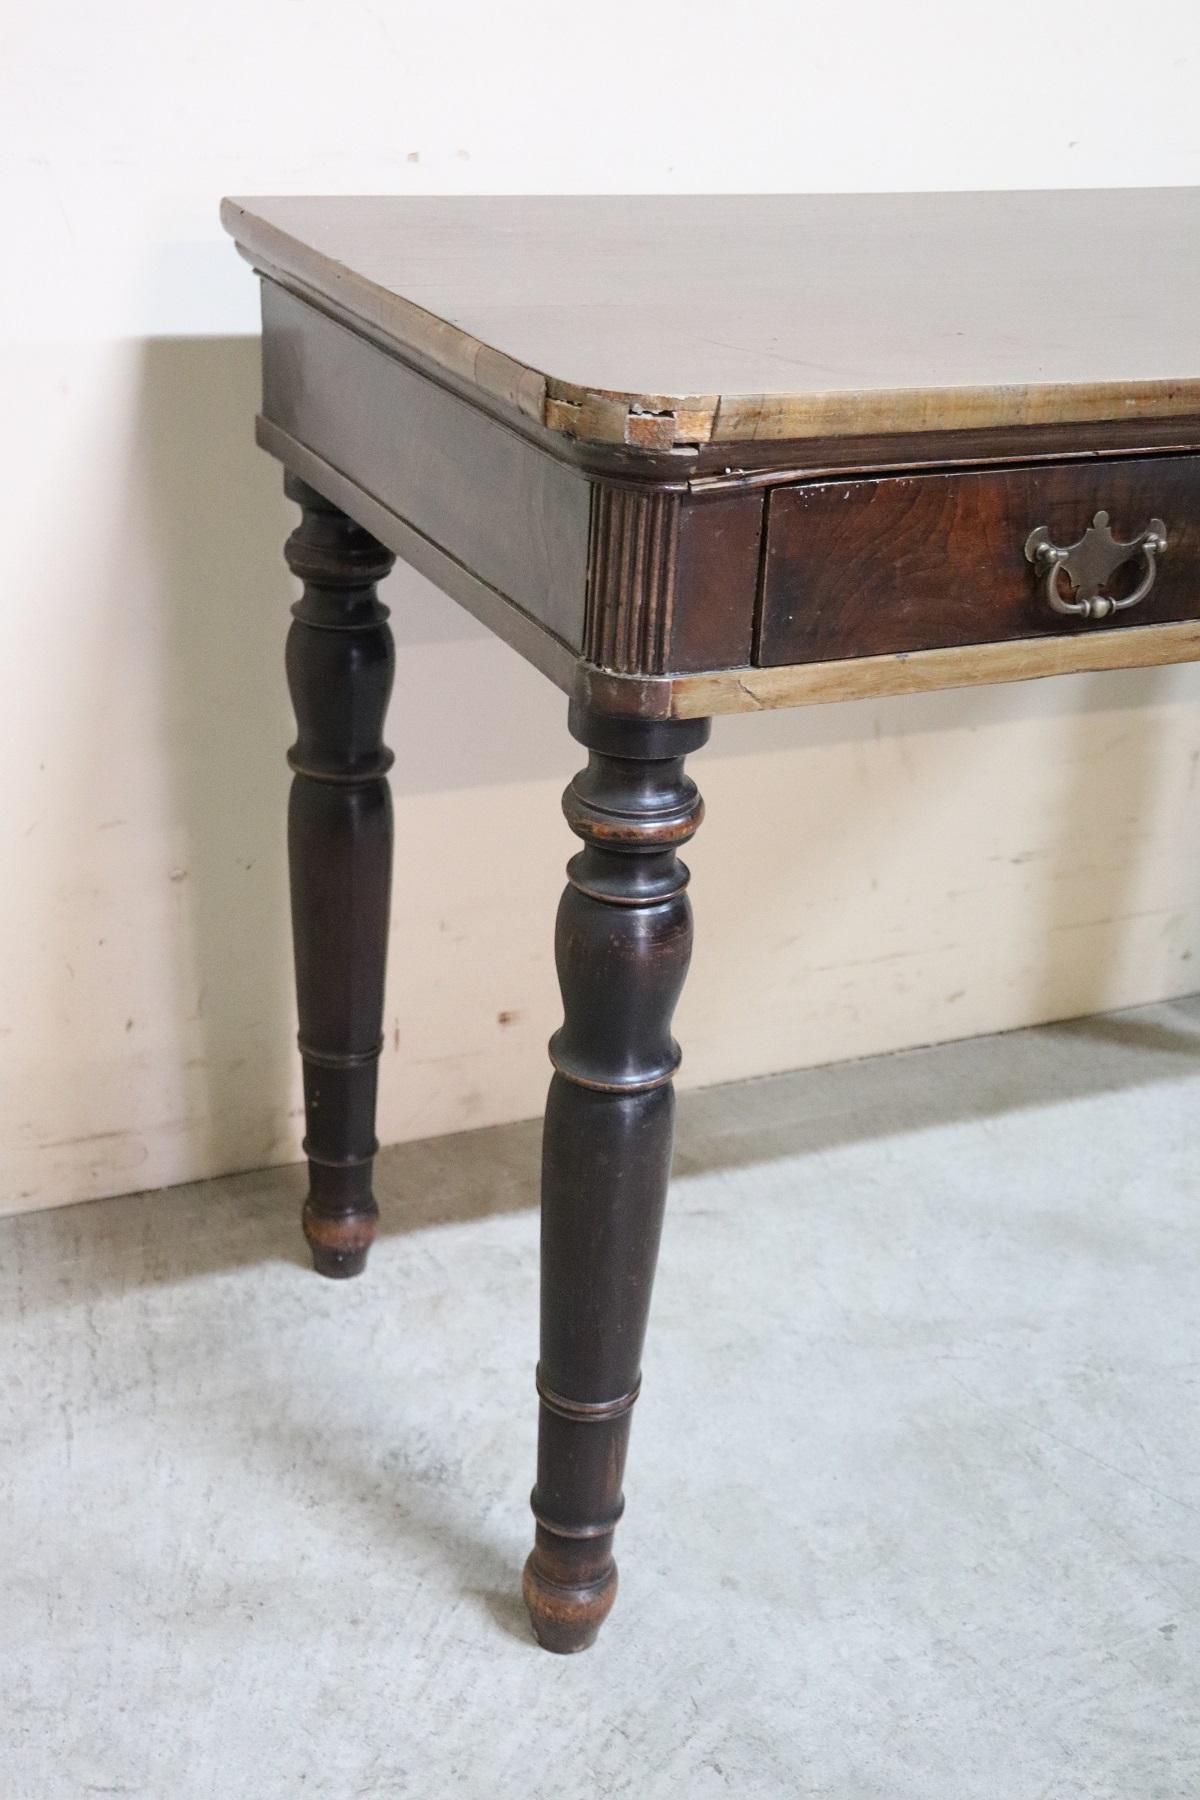 Elegant antique Italian Charles X writing desk. The desk is made of walnut wood. Simple essential line with solid turned legs. Plenty of space for your writing needs and one comfortable large drawers on the front. 
The antique desk has been used in